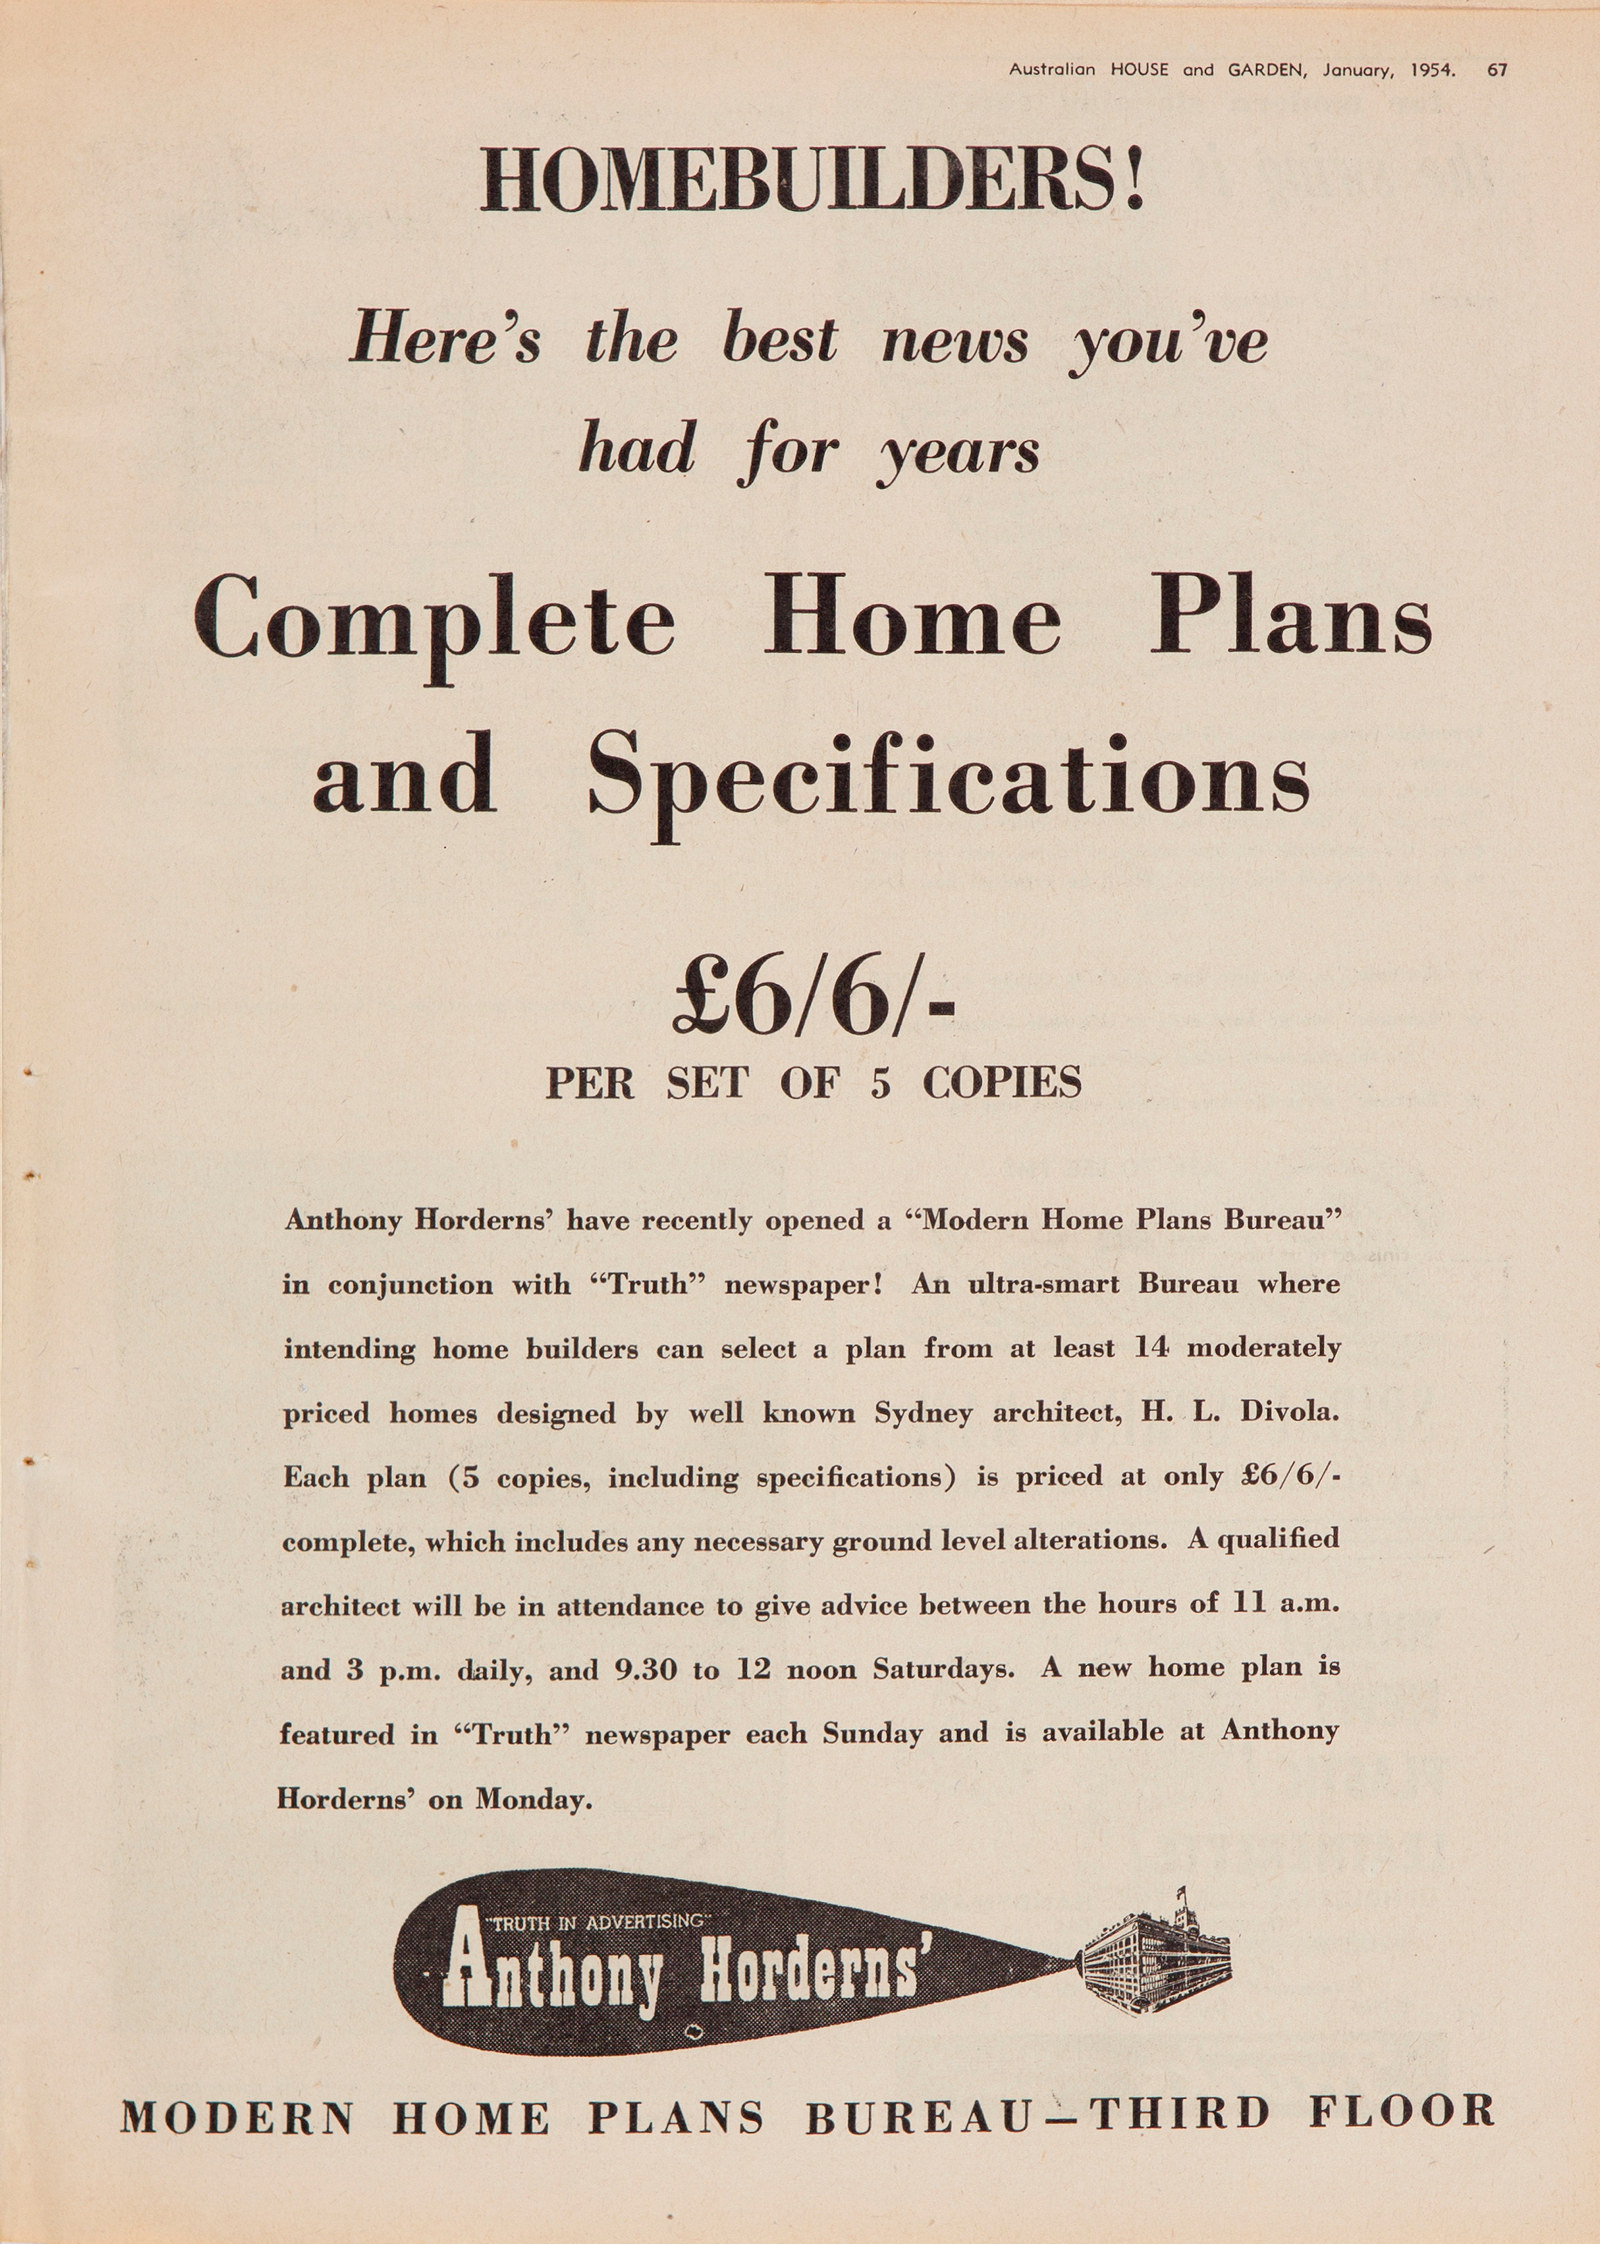 Page from catalogue. Headline: "Home builders! Here's the best news you've had for years."